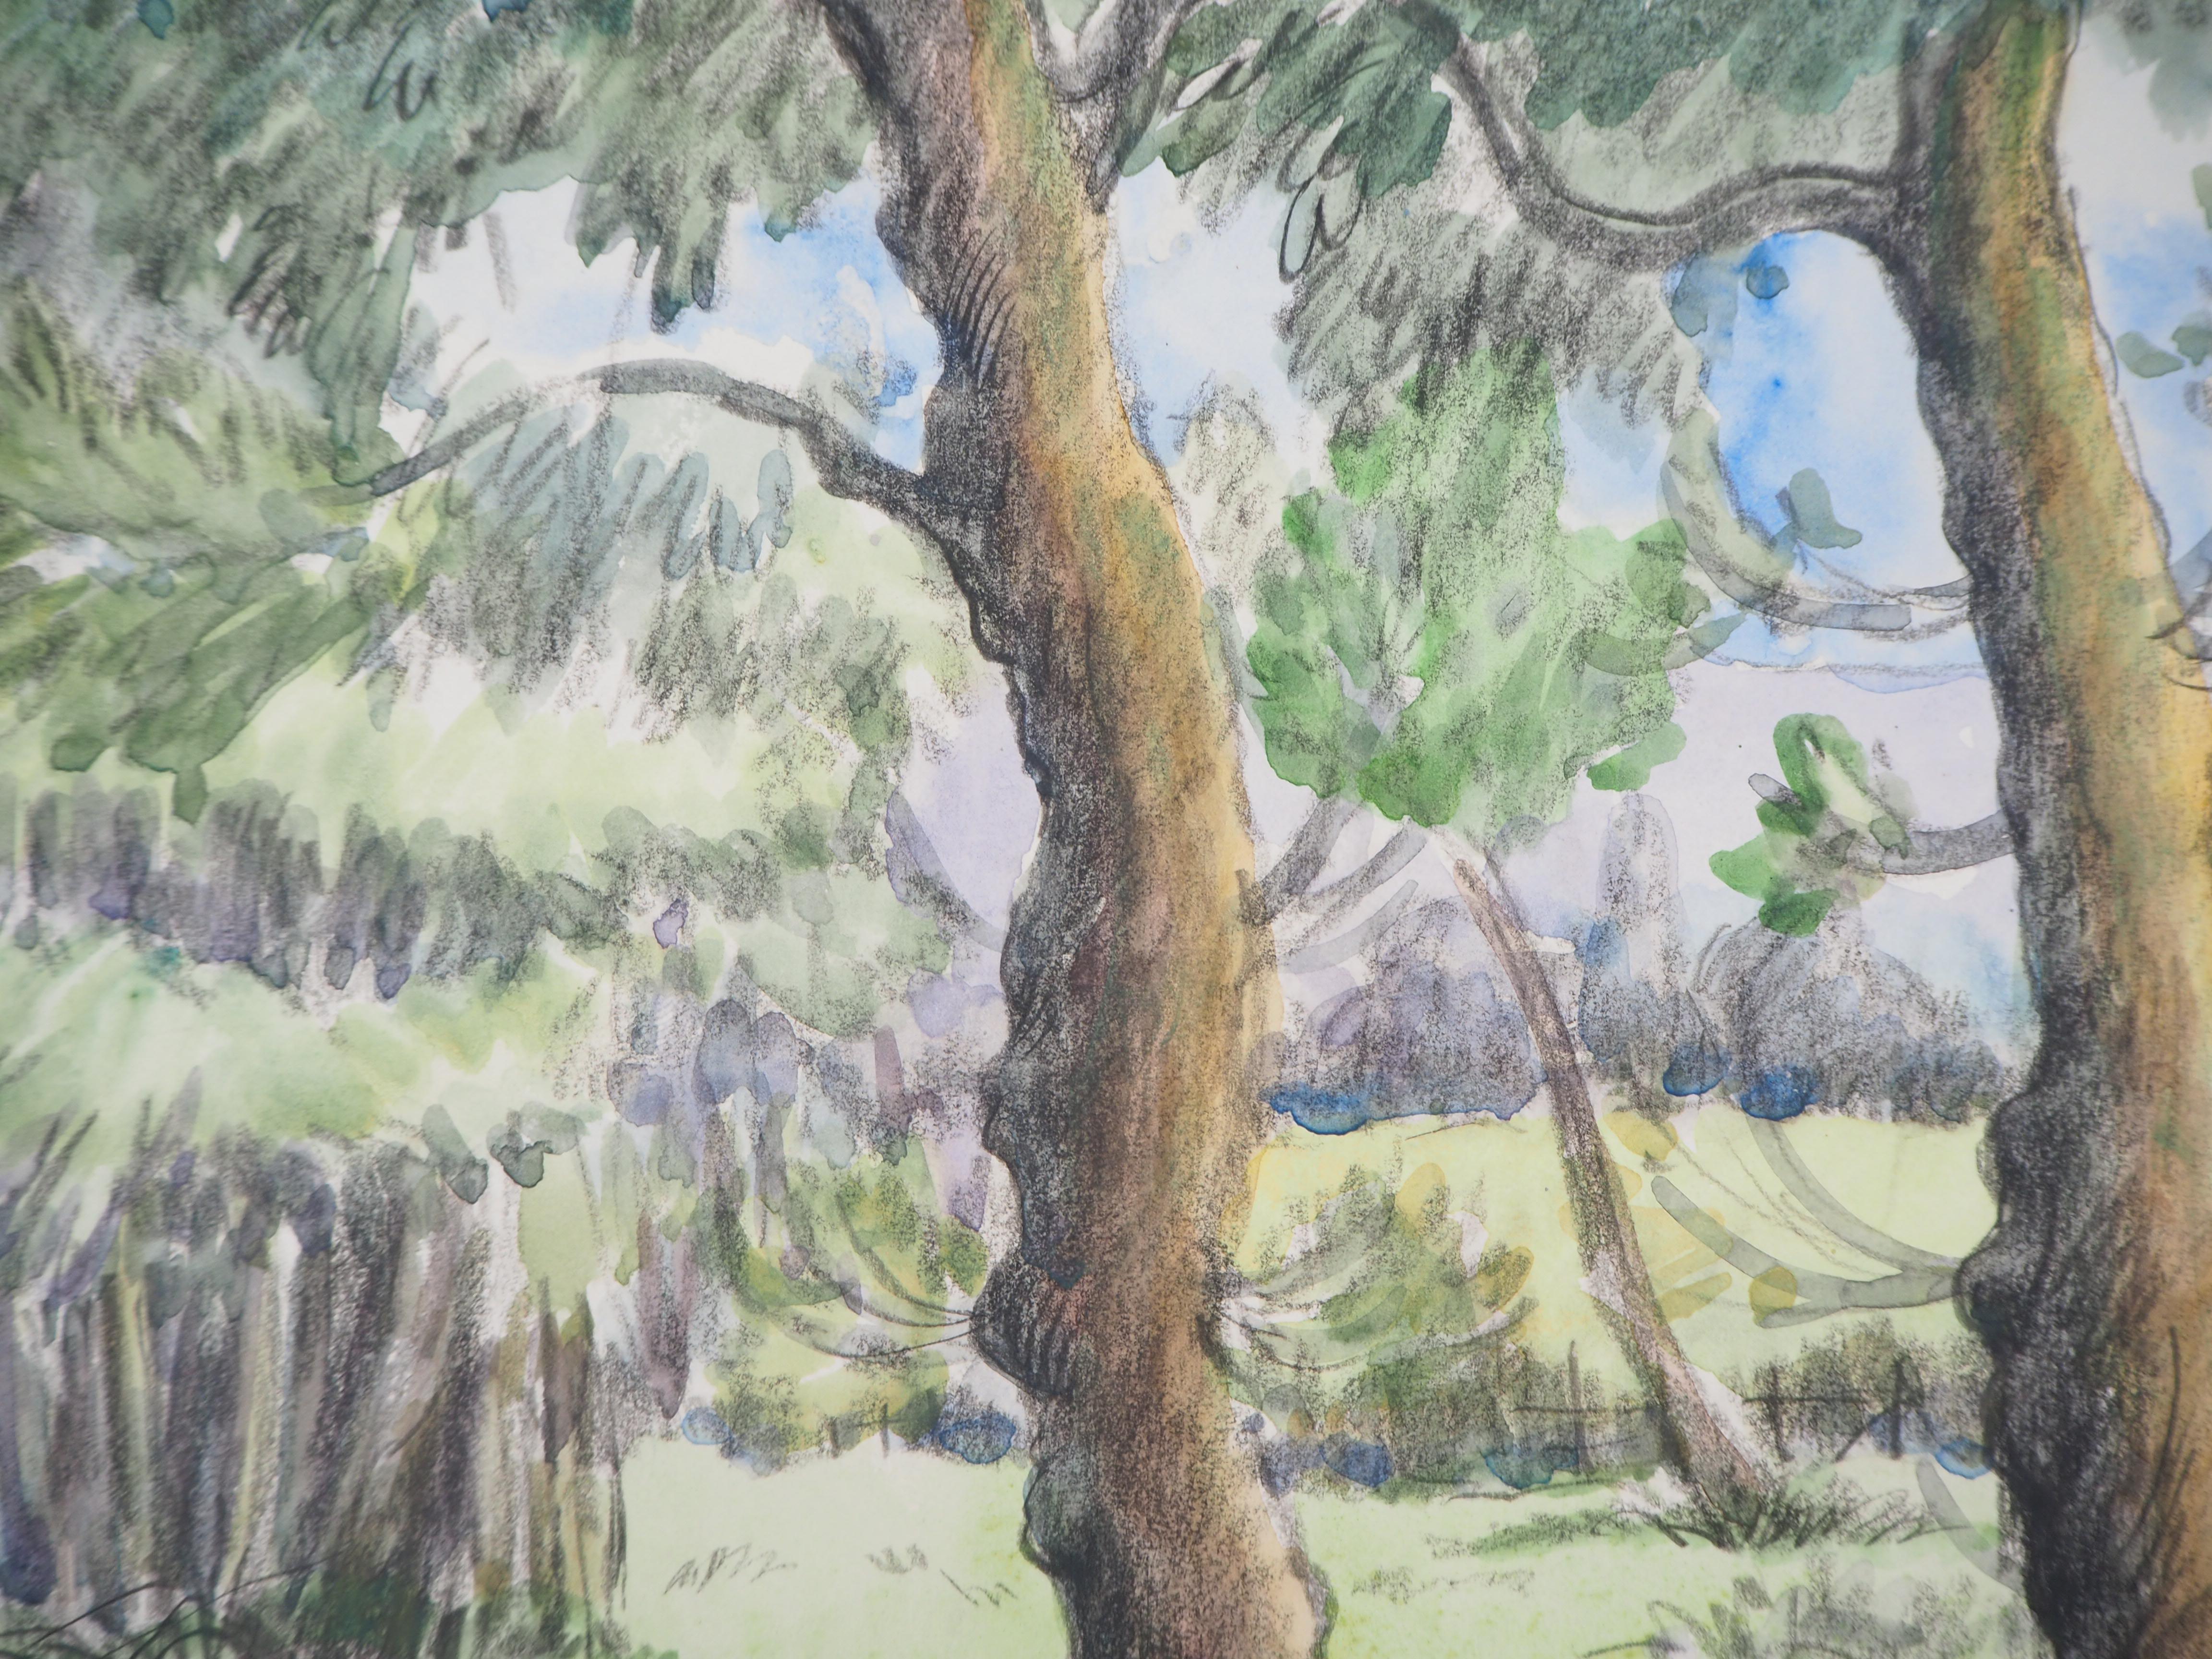 Tribute to Cezanne : The Old Pines - Original watercolor painting - Signed - Impressionist Art by Paul Emile Pissarro